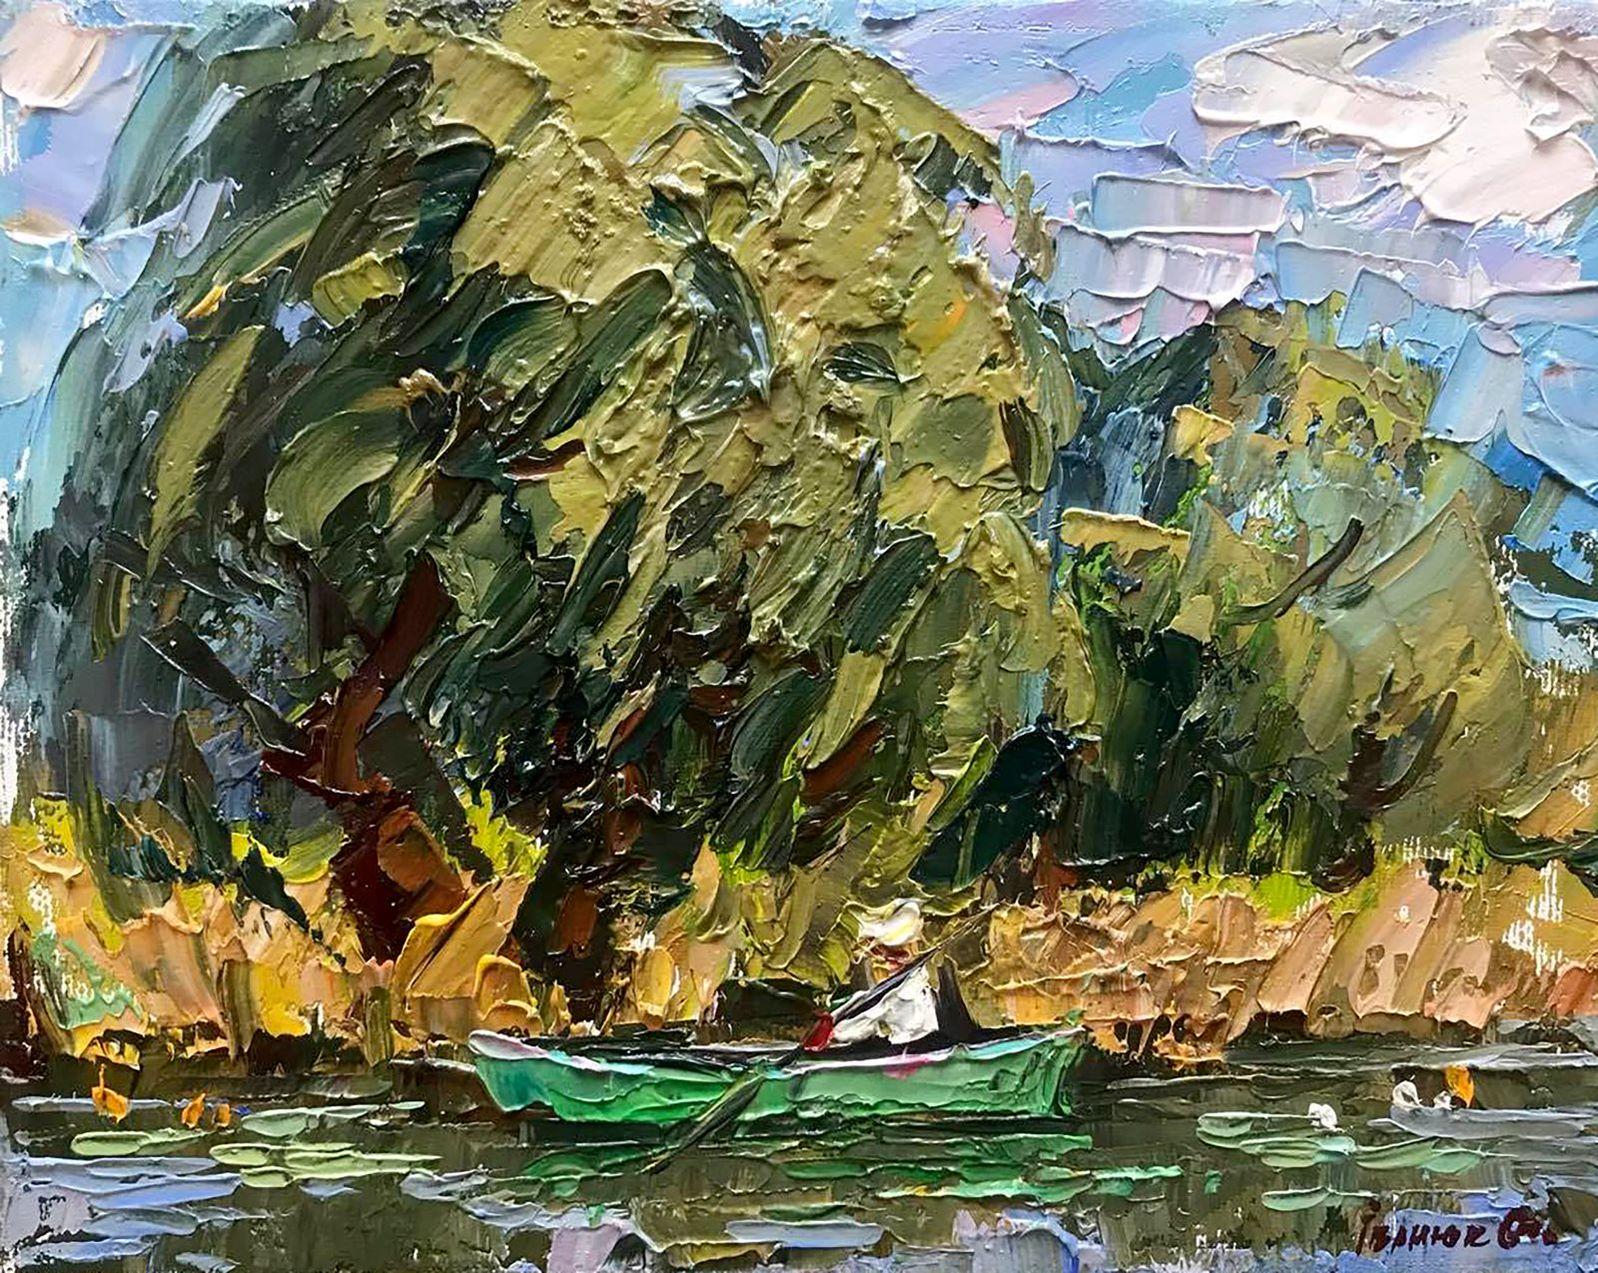 Alex Kalenyuk   Landscape Painting - The Boatman floats on the River, Original oil Painting, Ready to Hang